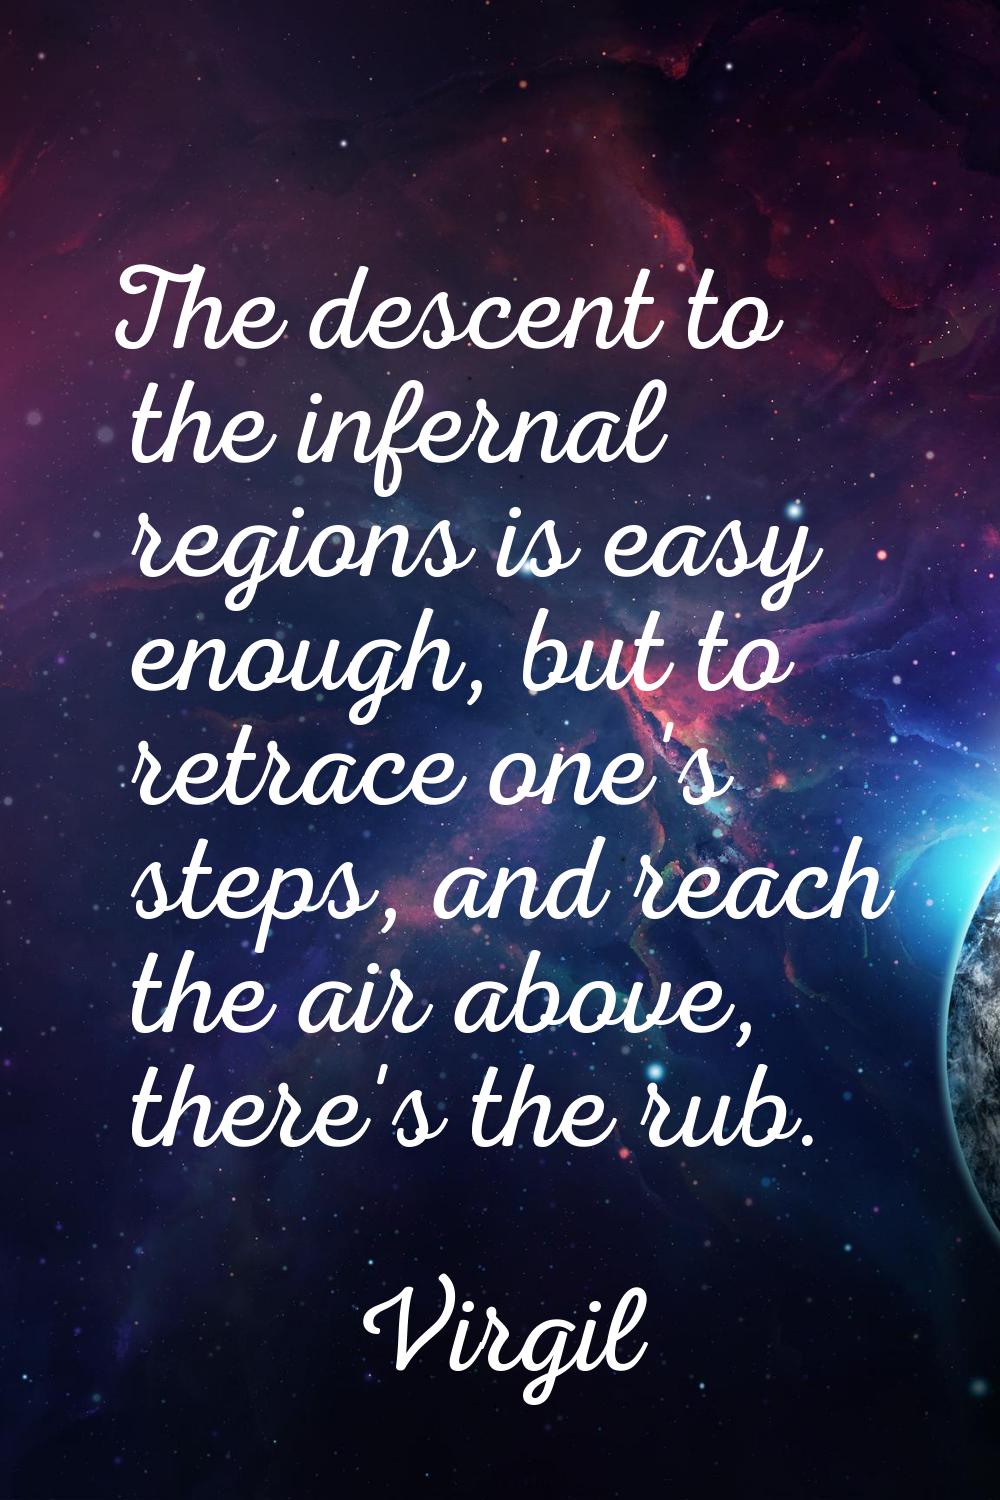 The descent to the infernal regions is easy enough, but to retrace one's steps, and reach the air a